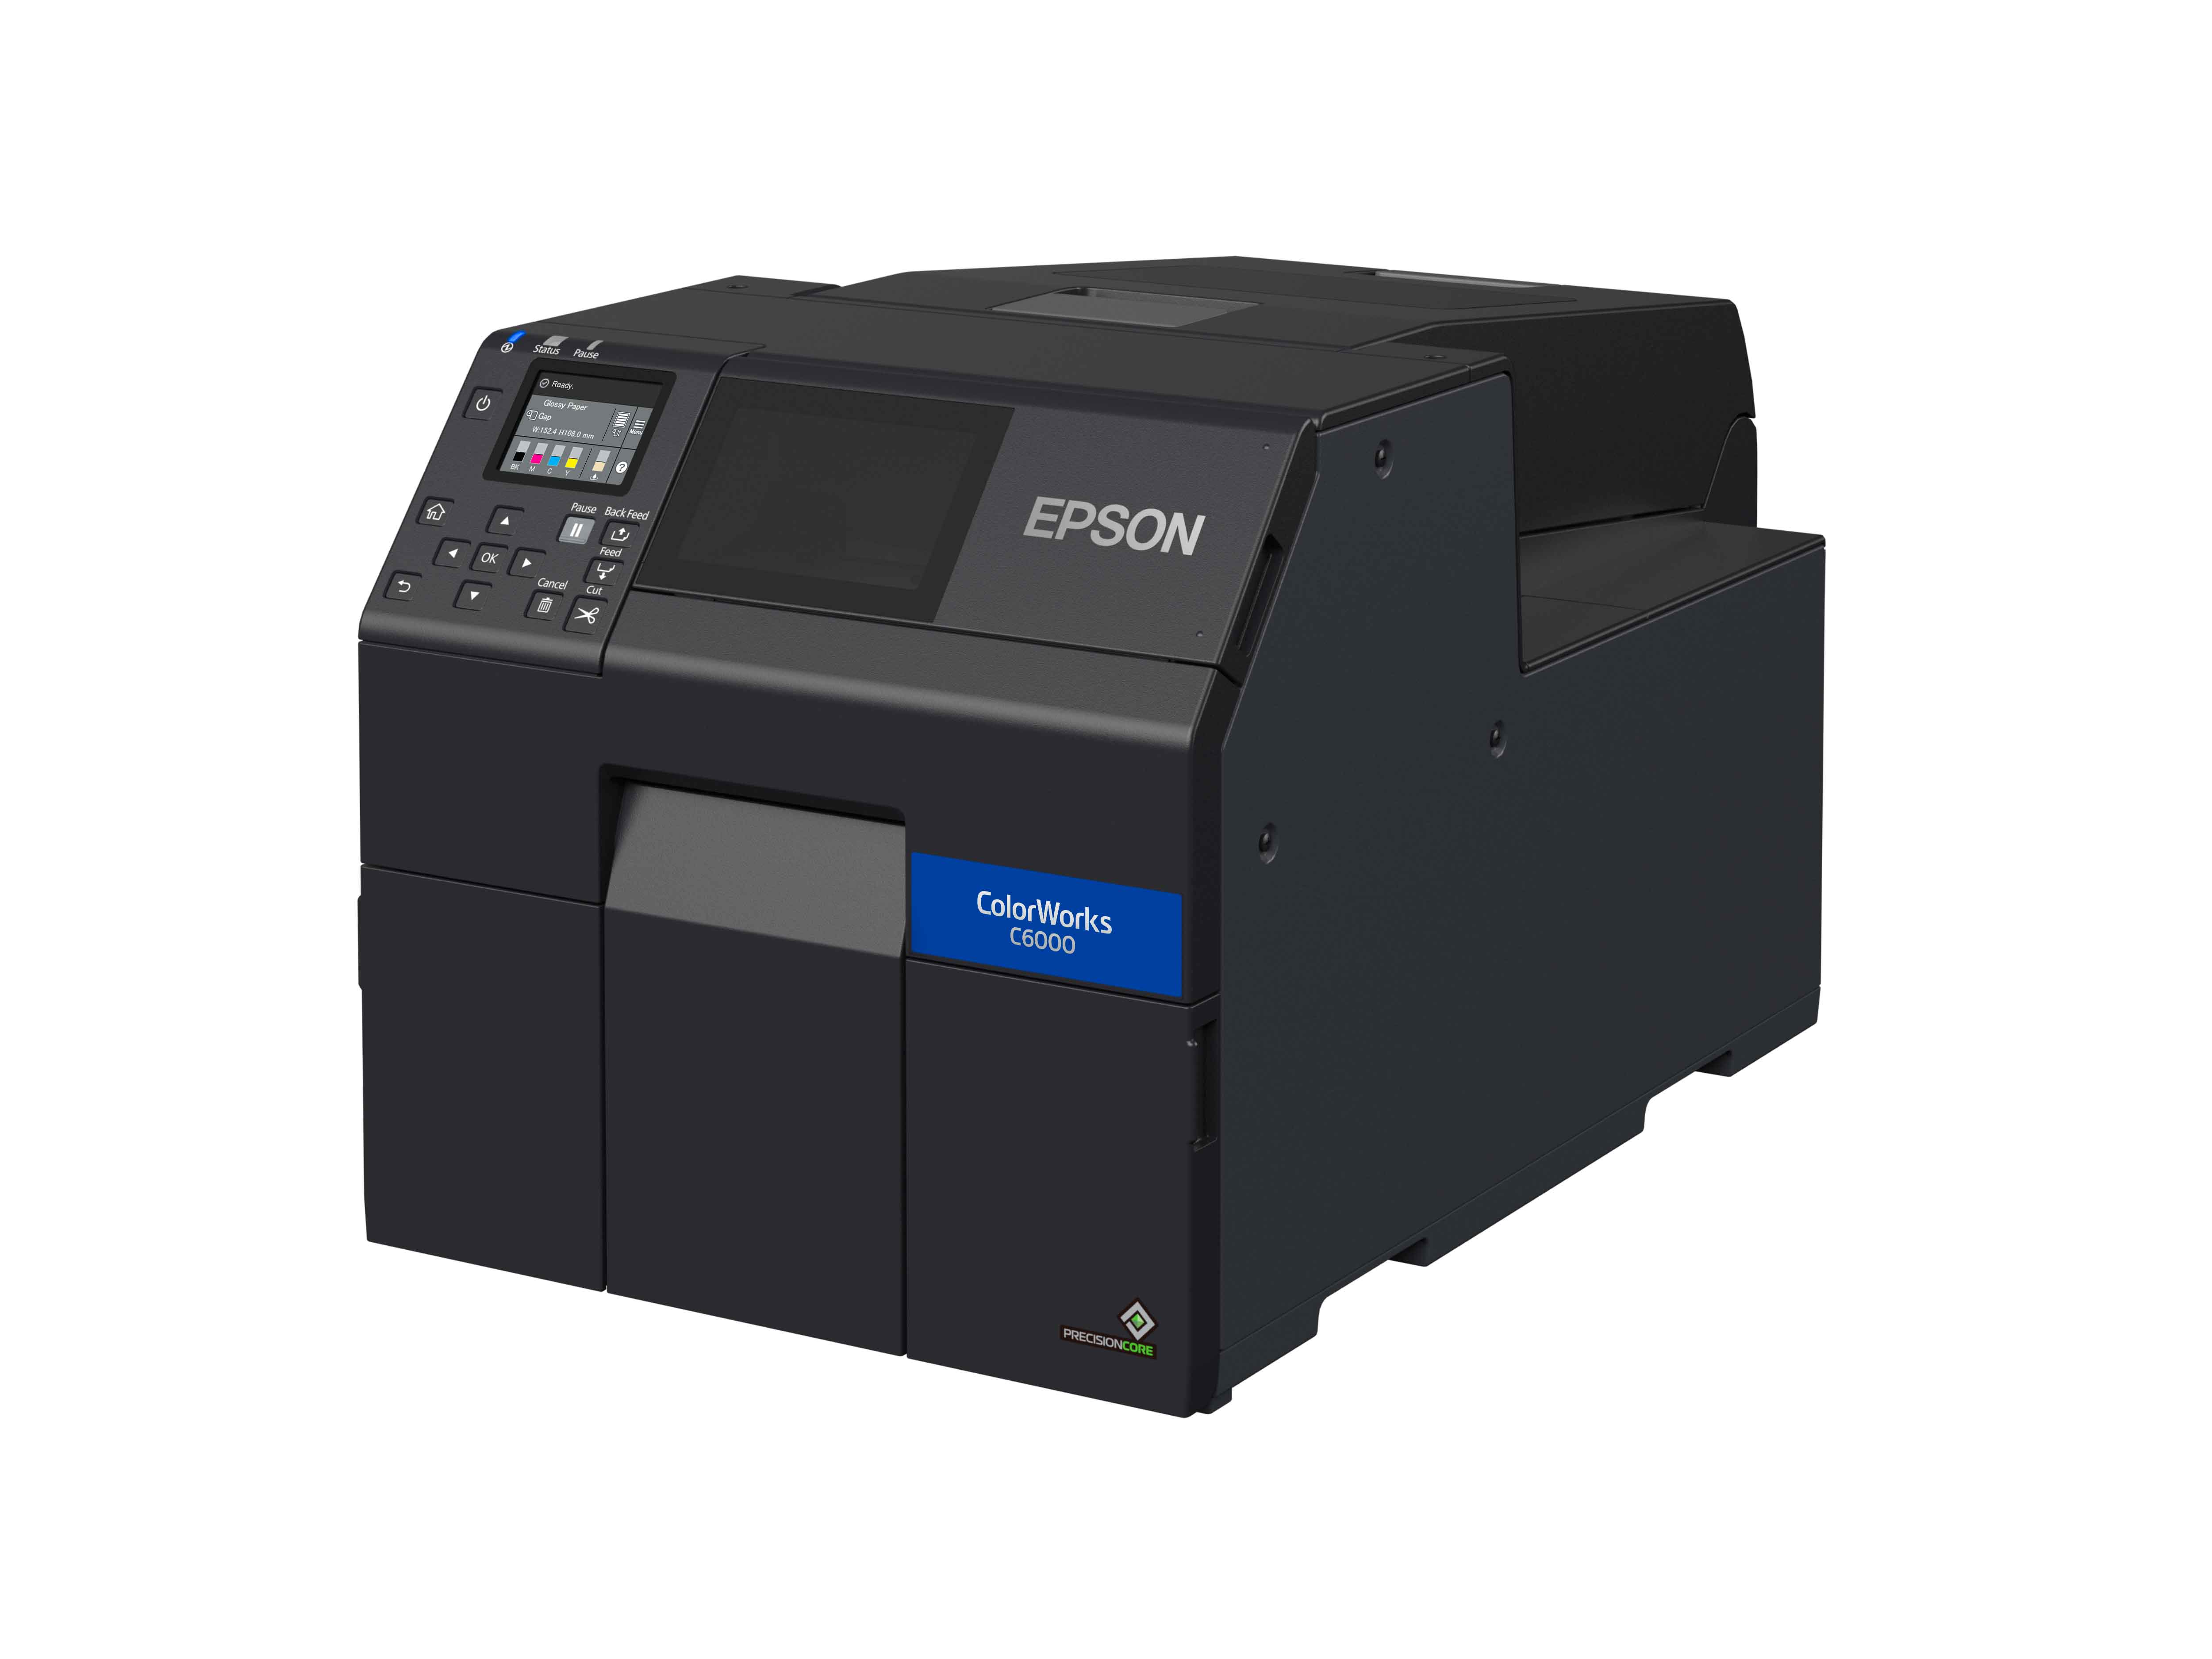 Epson® ColorWorks C6000AE(mk) Color Labelprinter - with cutter